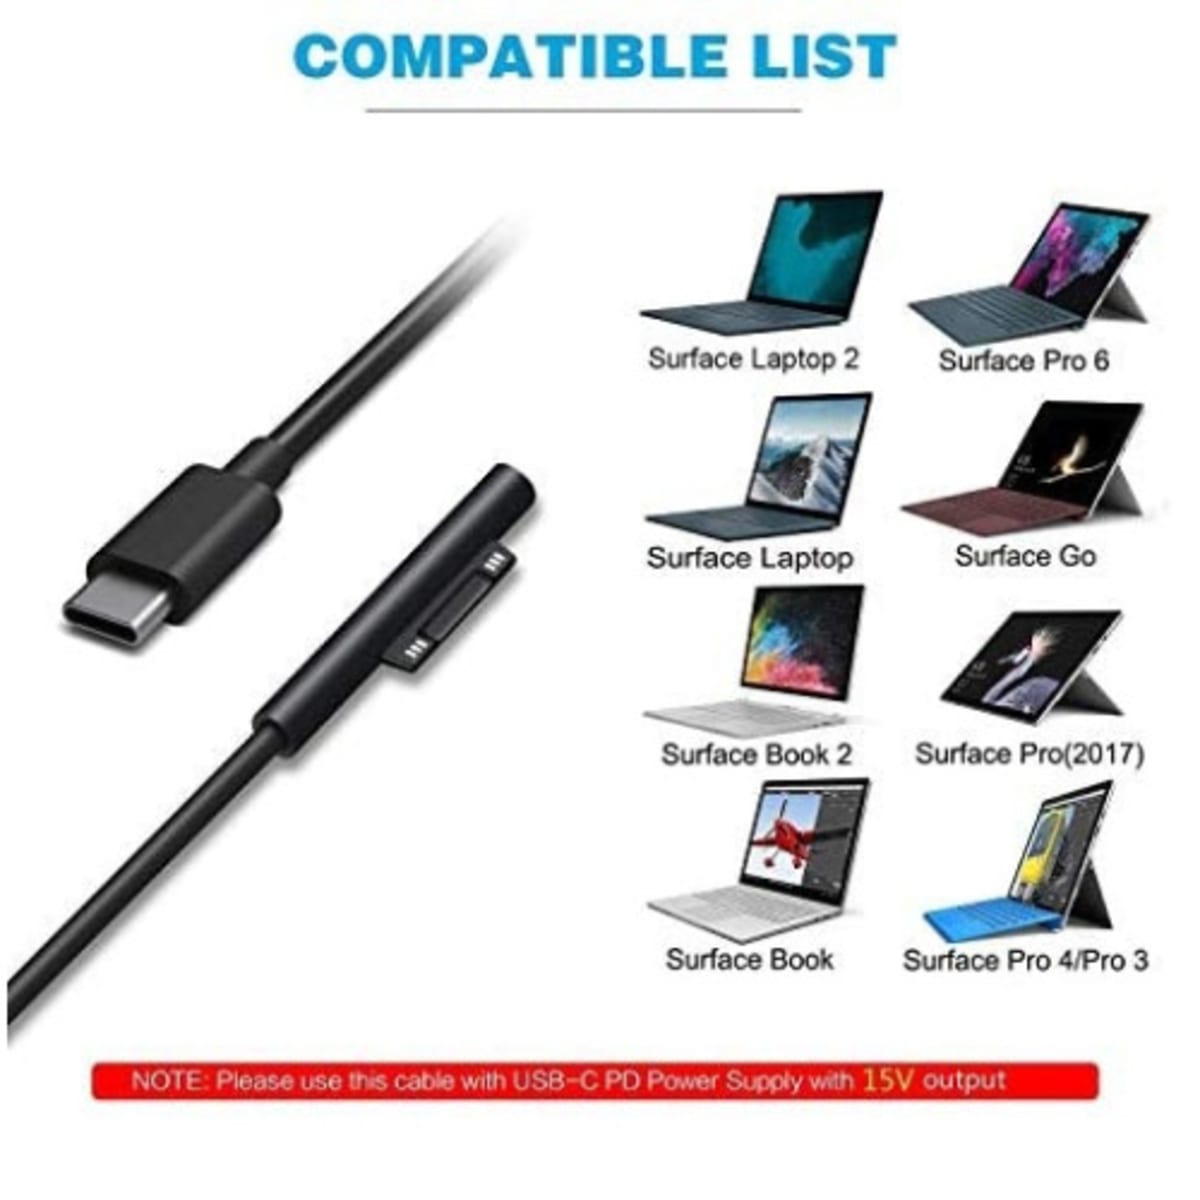 Usb-c Charging Cable For Microsoft Surface Pro | Konga Shopping